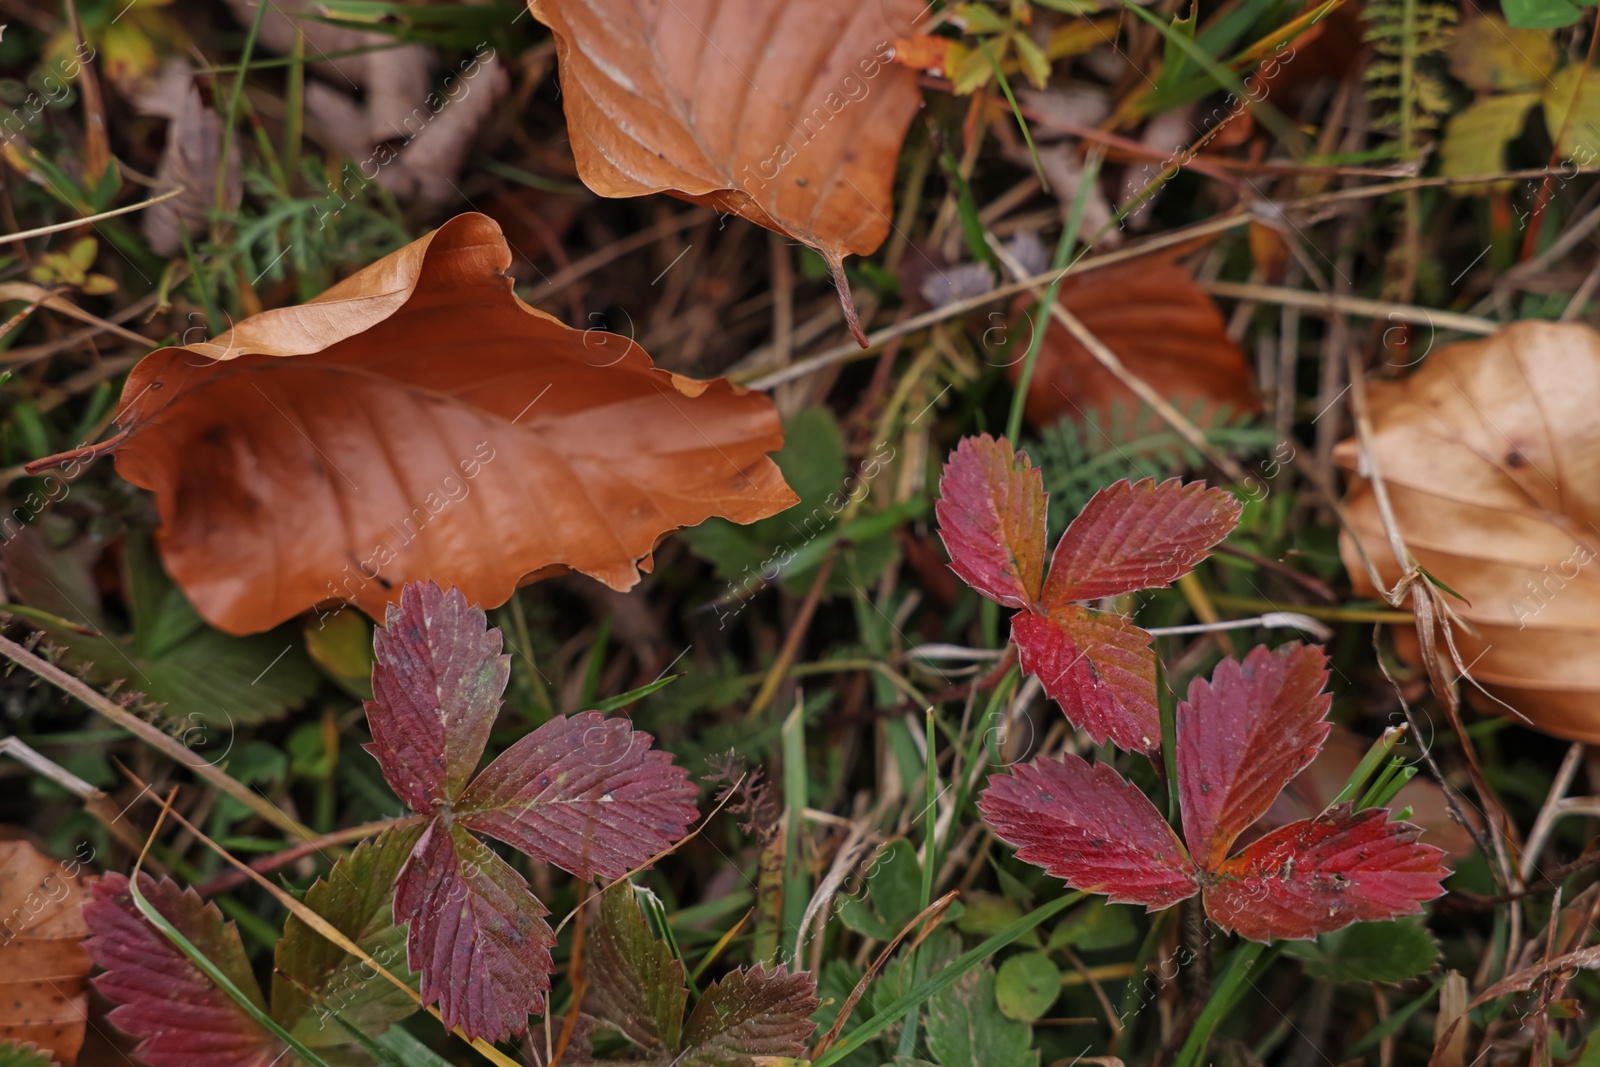 Photo of Wild strawberry and fallen leaves outdoors on autumn day